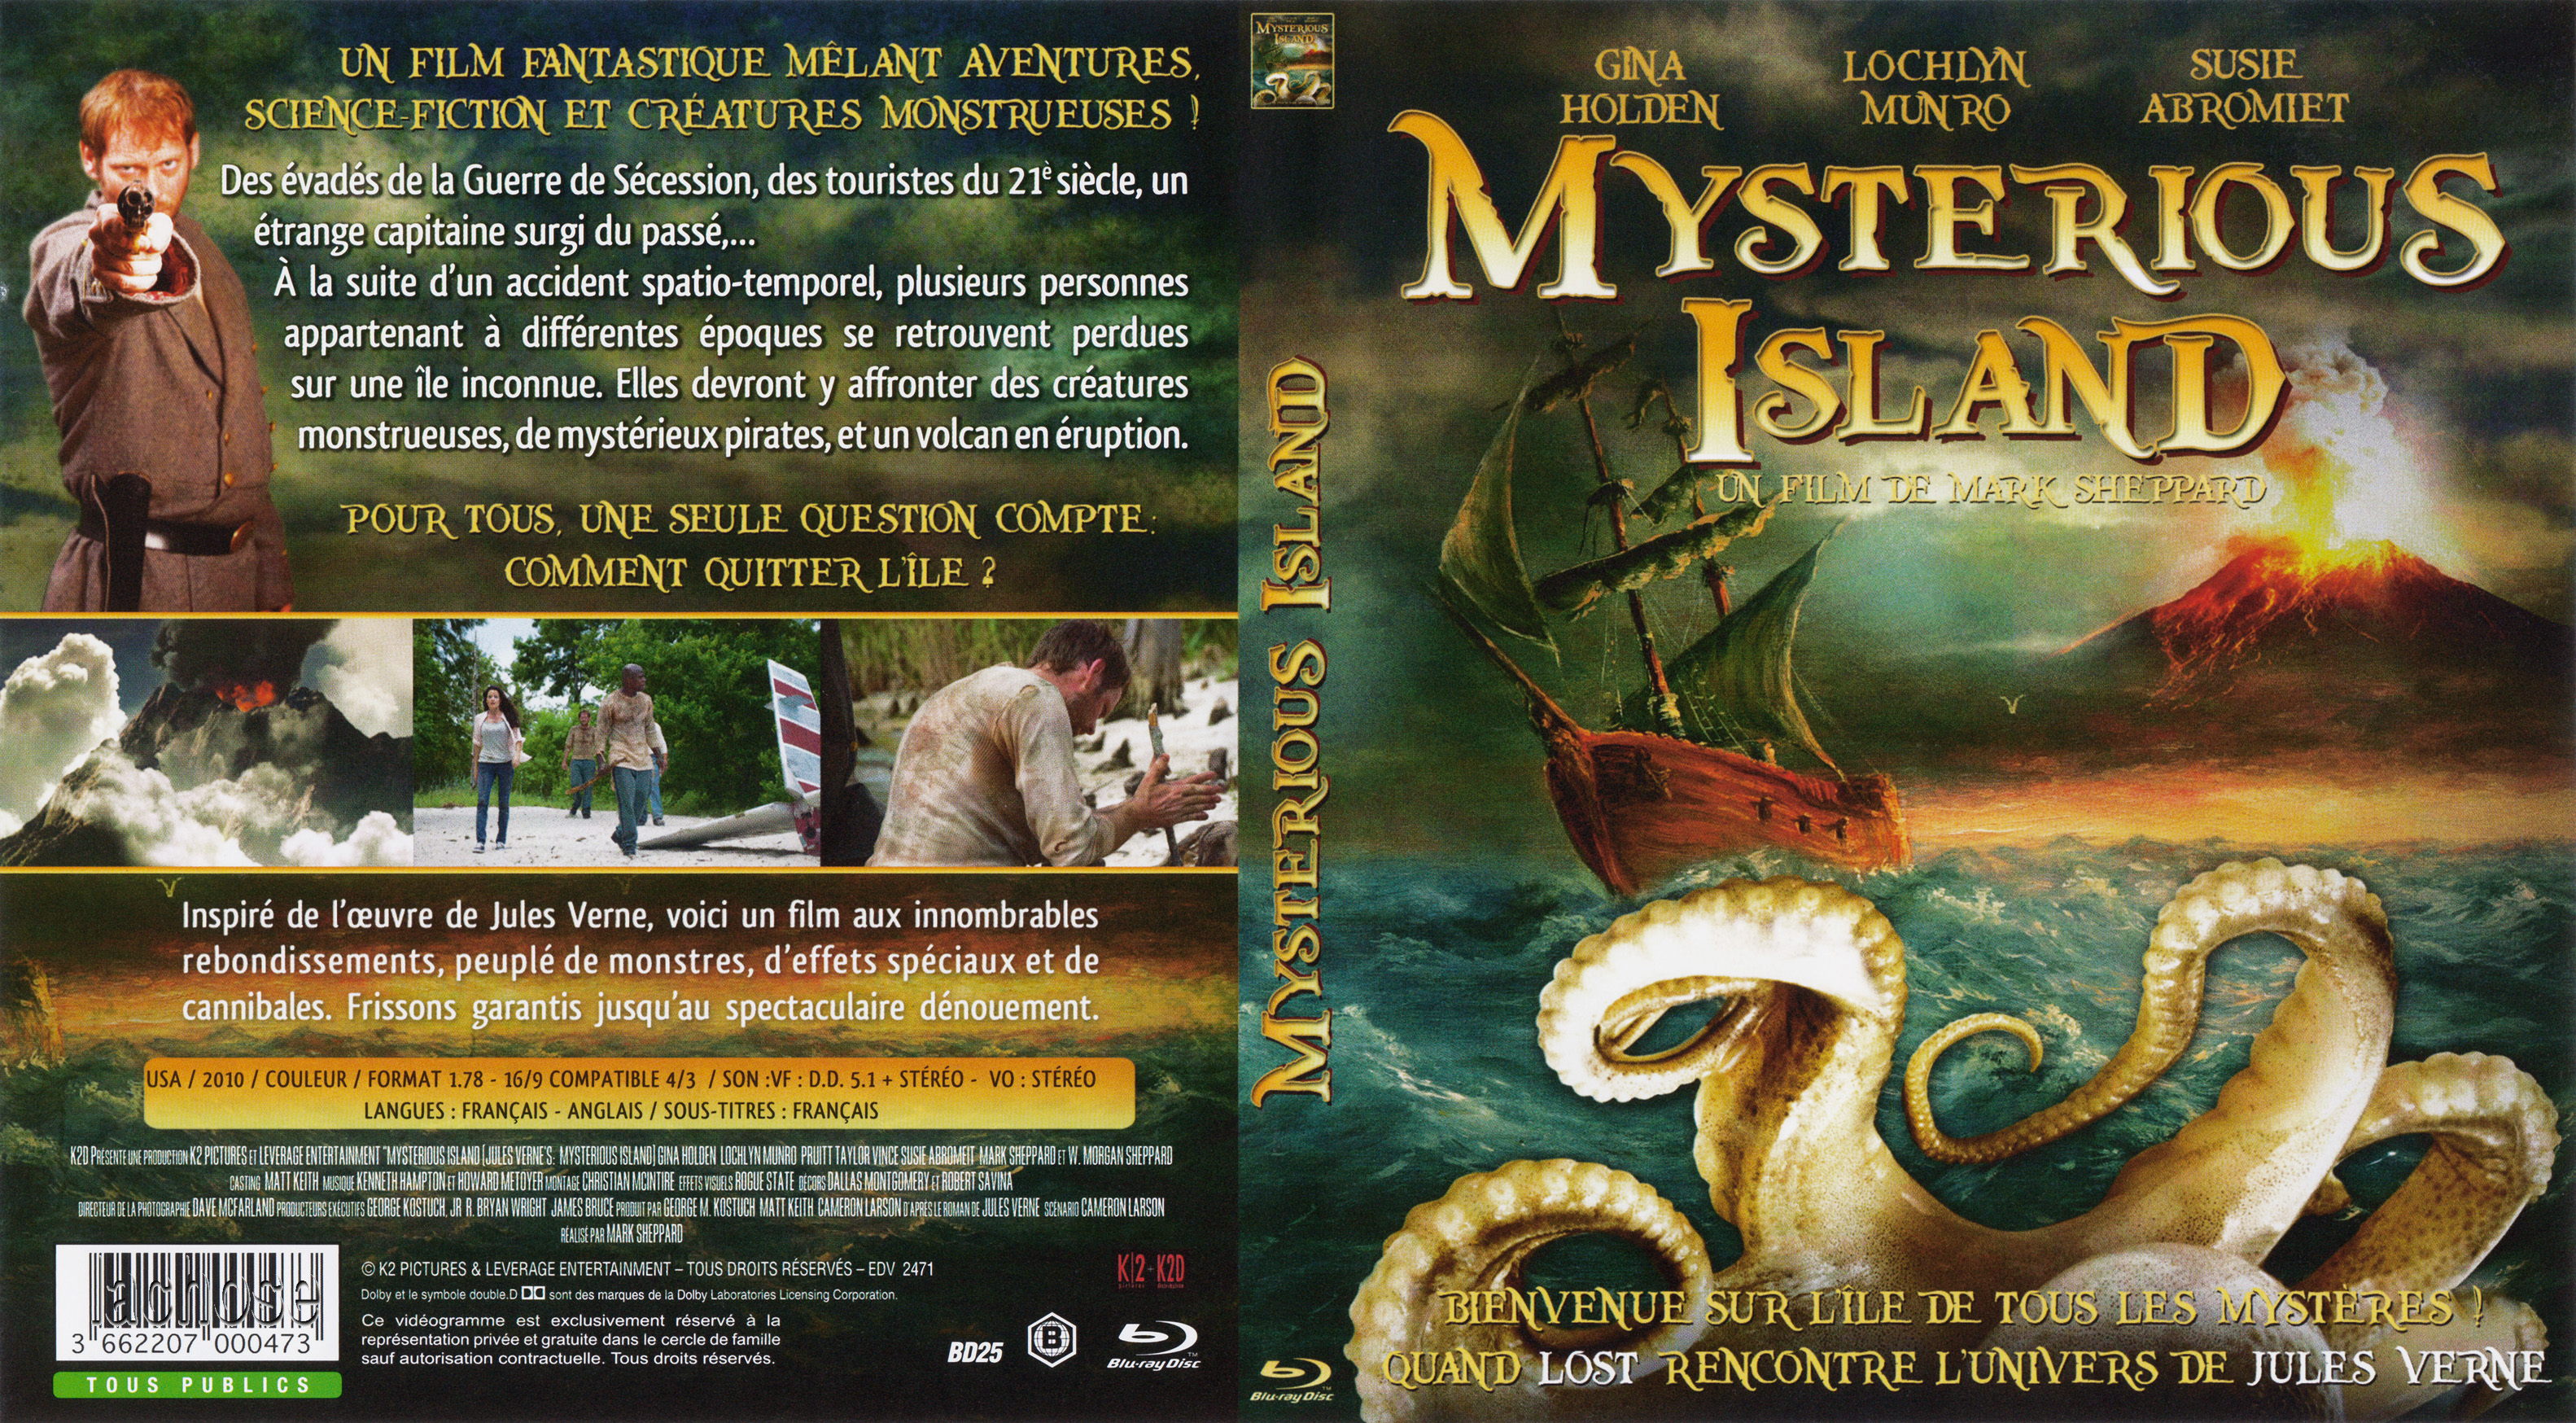 Jaquette DVD Mysterious island (BLU-RAY)